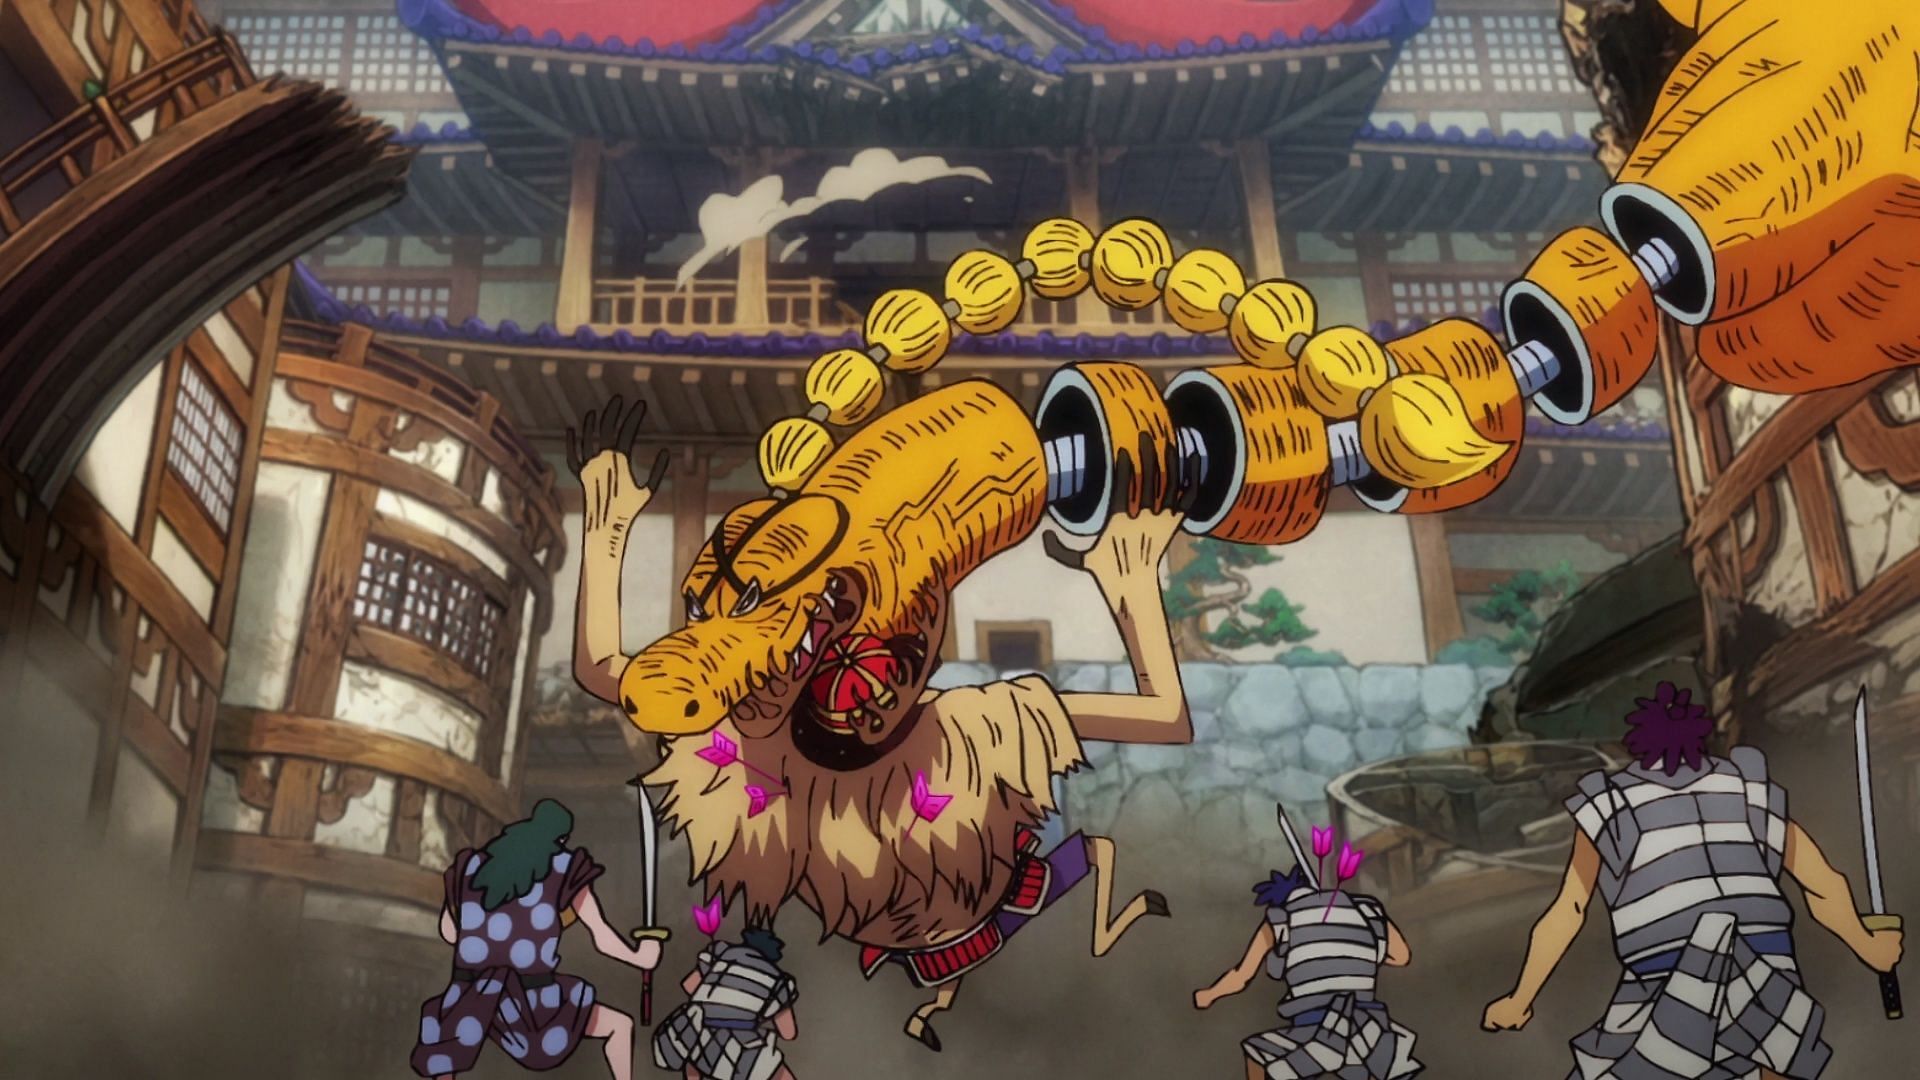 Queen attacking Chopper in One Piece (Image via Toei Animation)